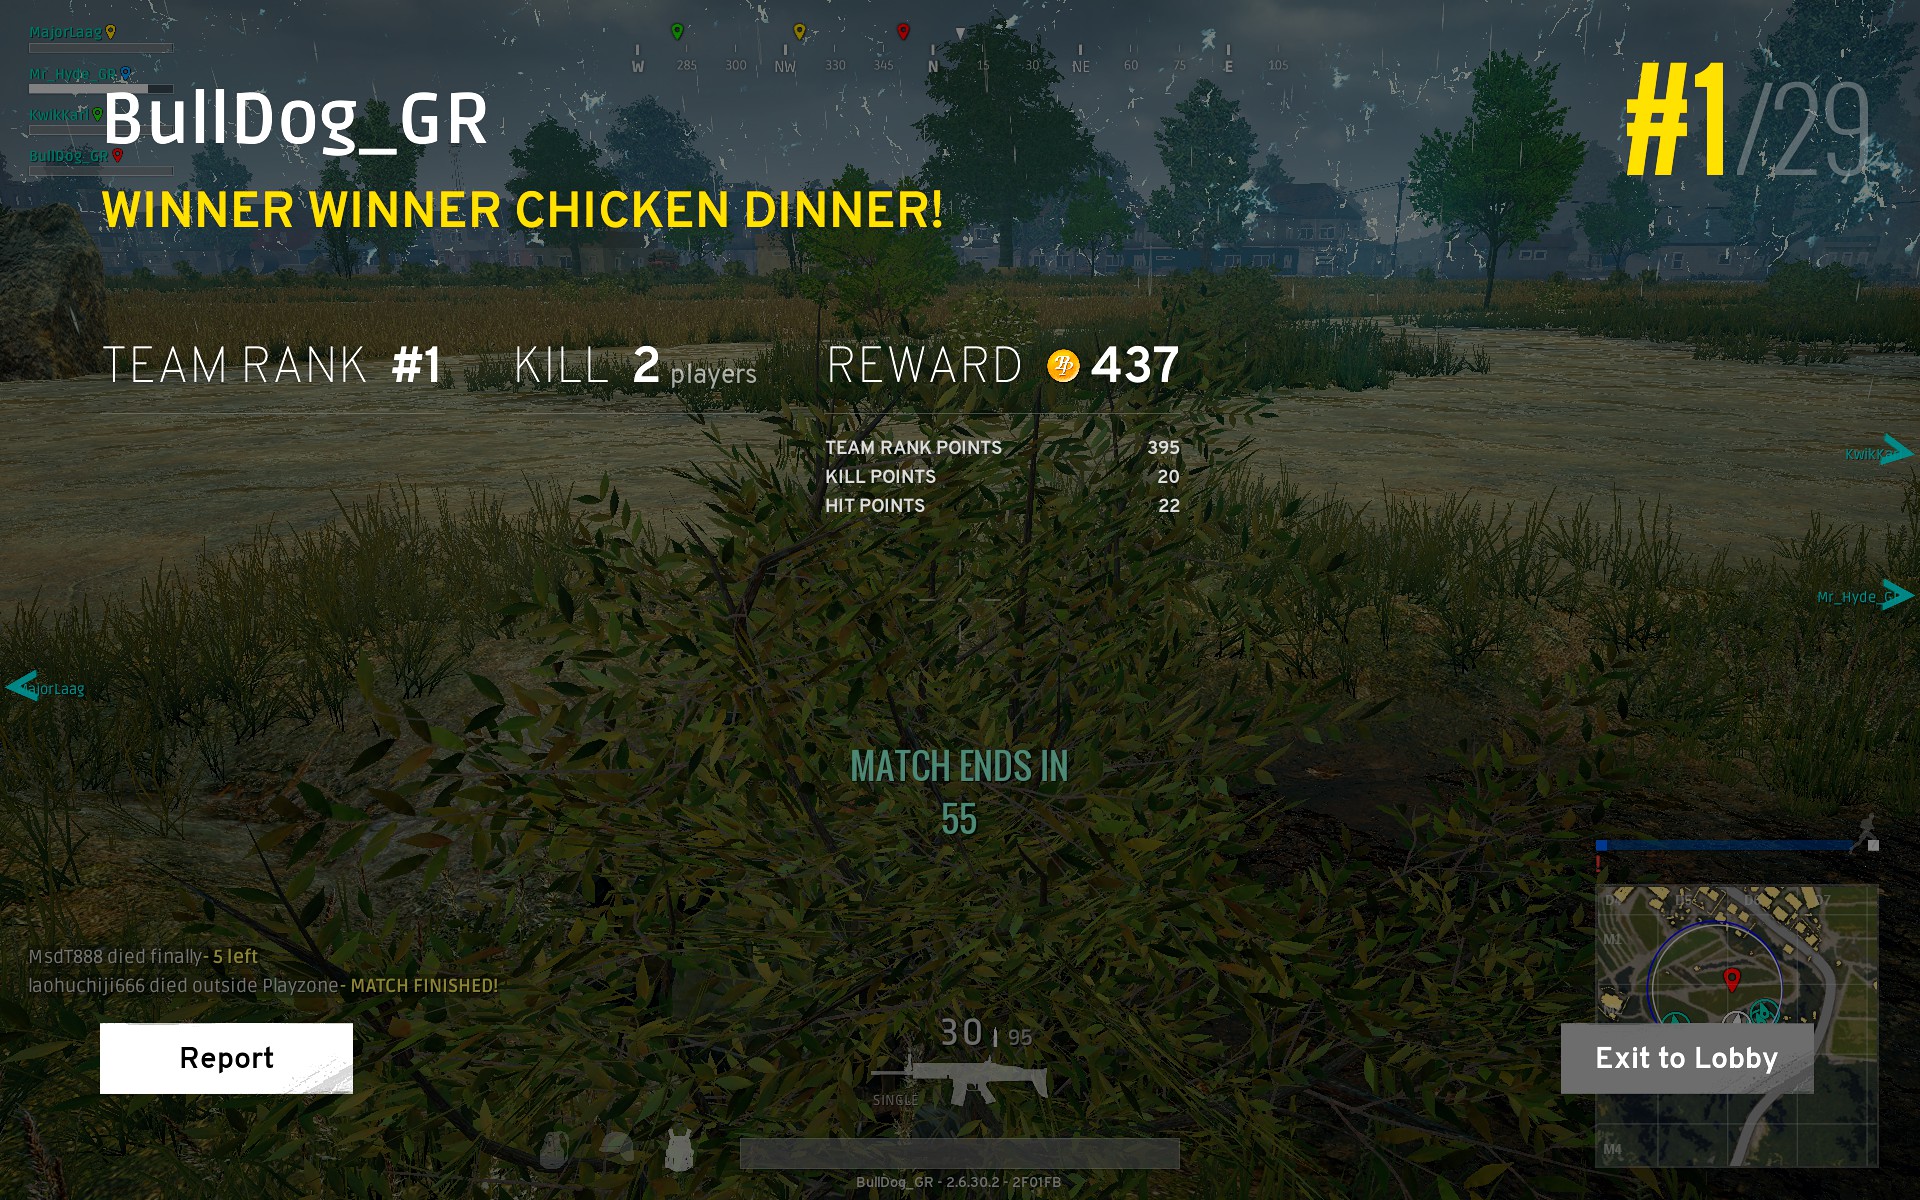 Lets see your Winner Winner Chicken Dinner screenshots! - Page 2 7DAB1D08E36171E32DD14A60EAB964391F69AE2A